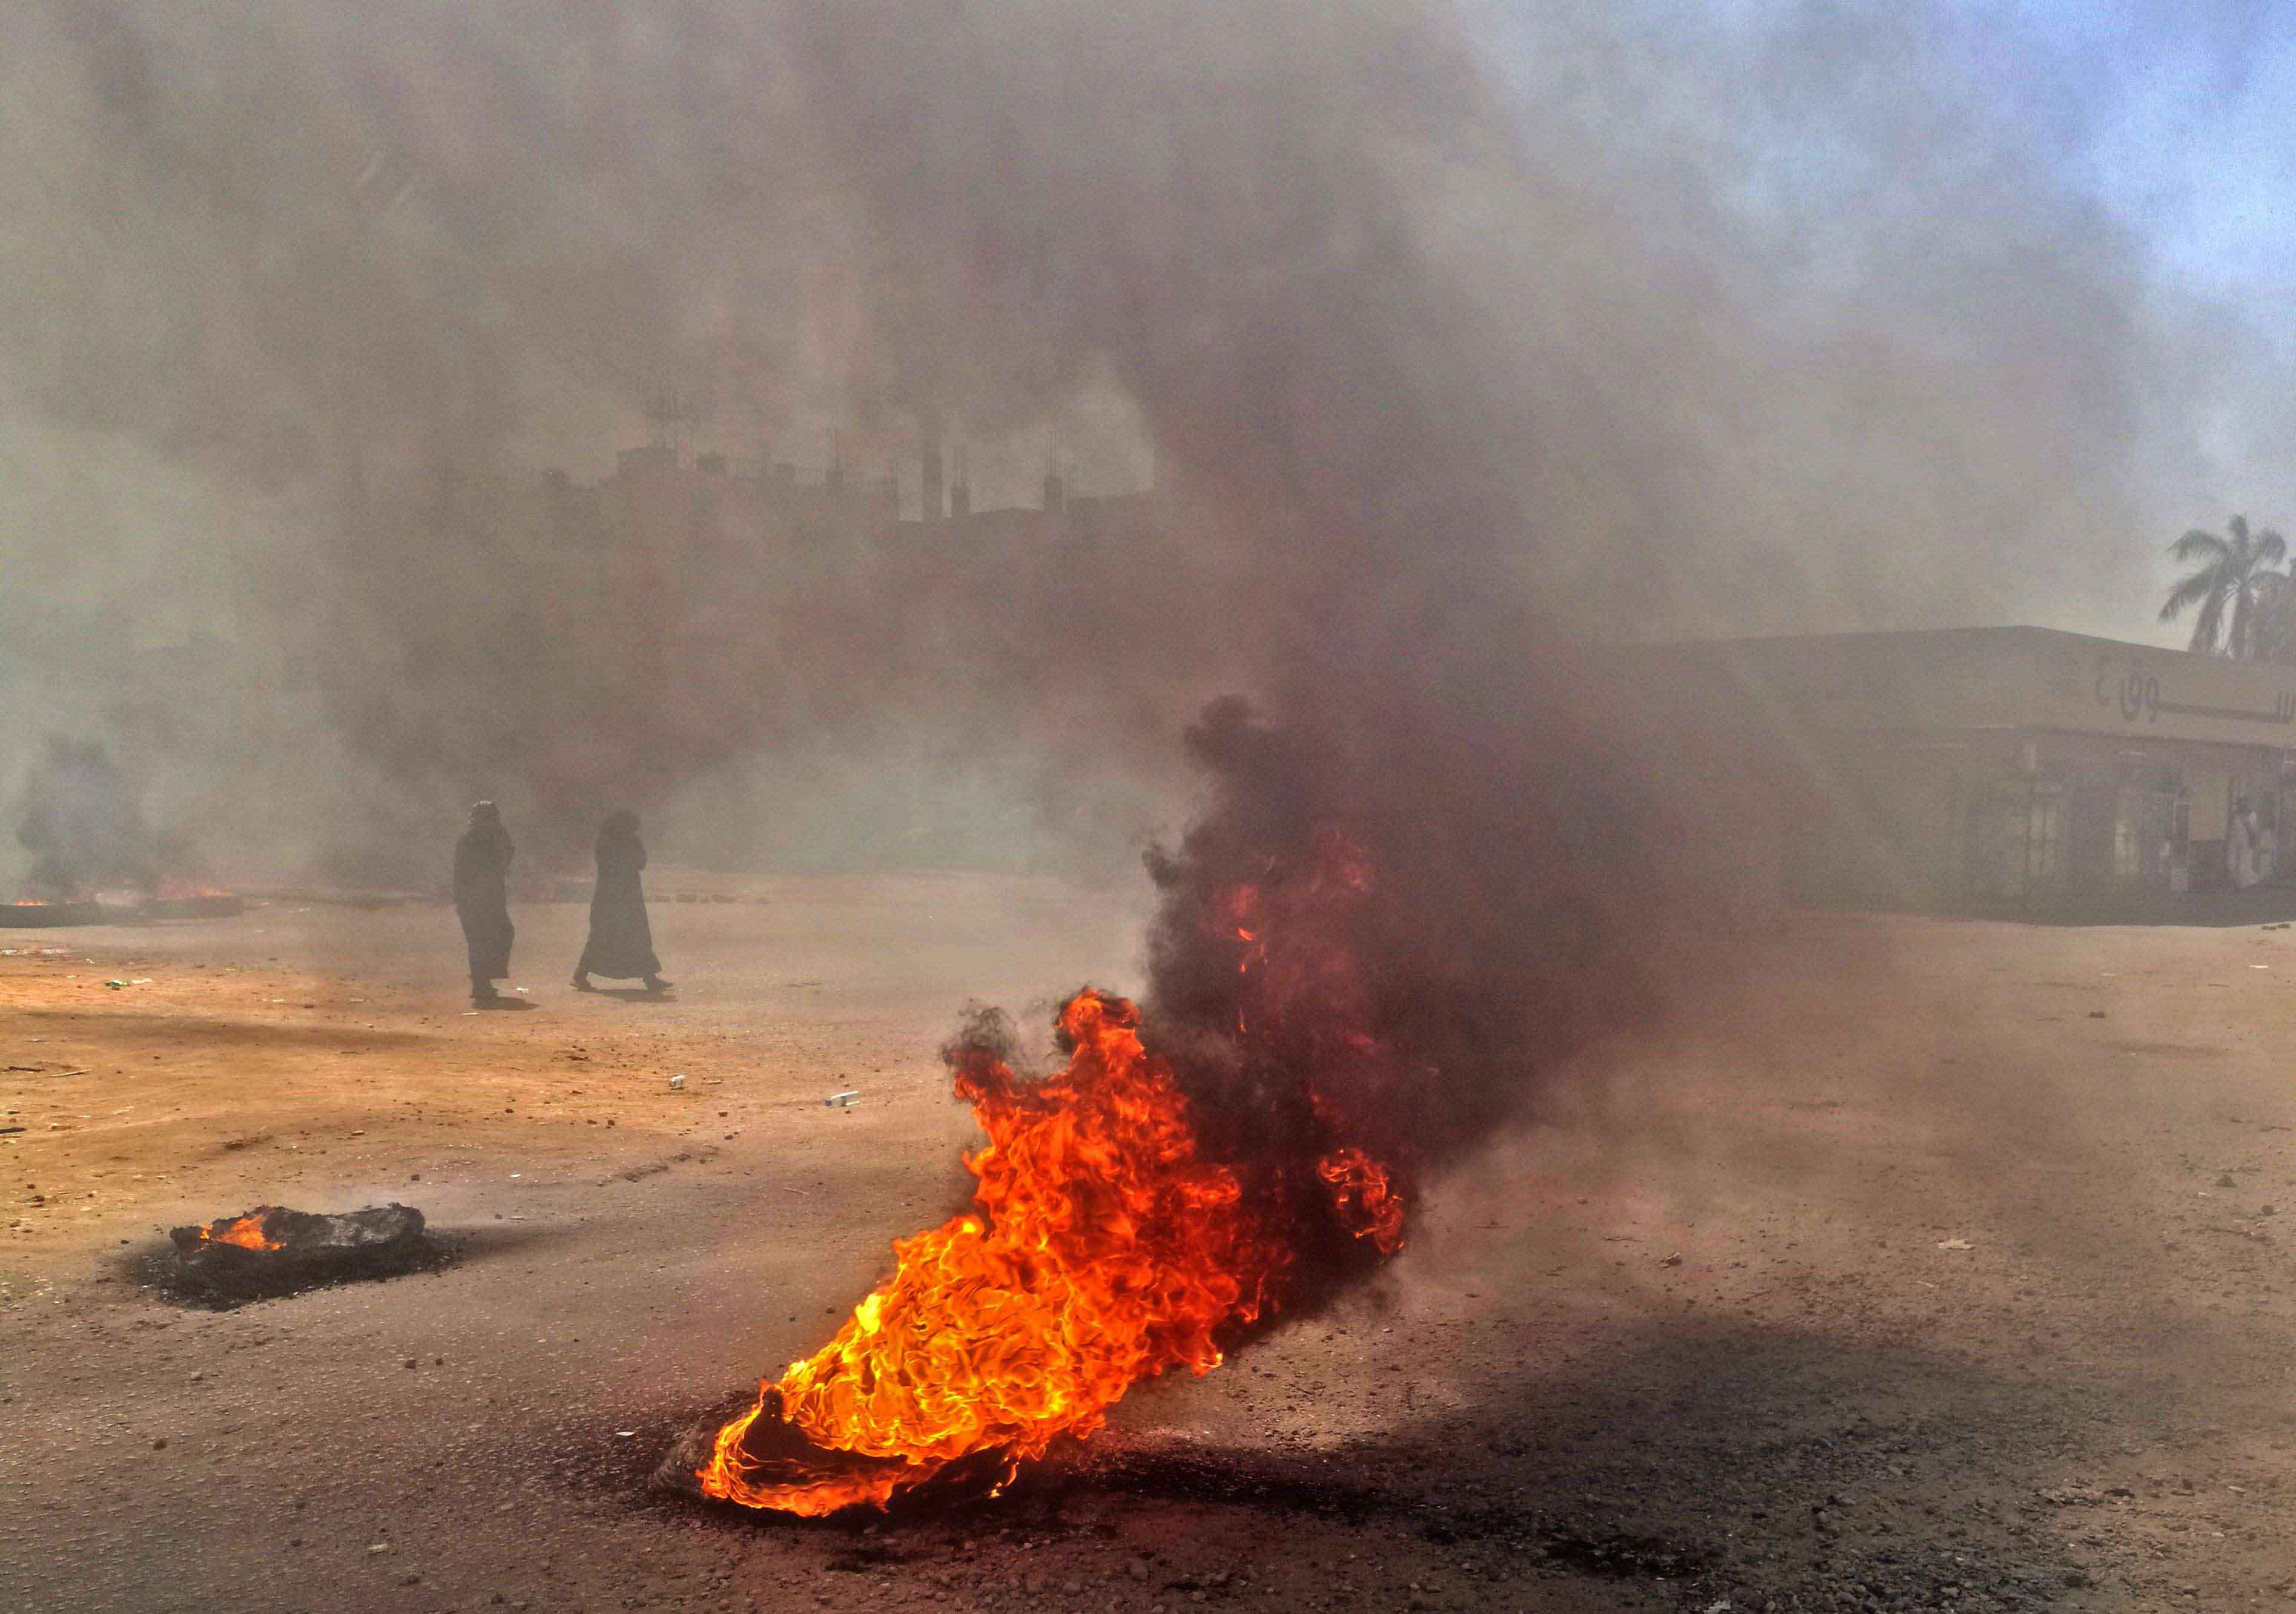 Protests have rocked Sudan since December 19 when the government raised the price of bread,